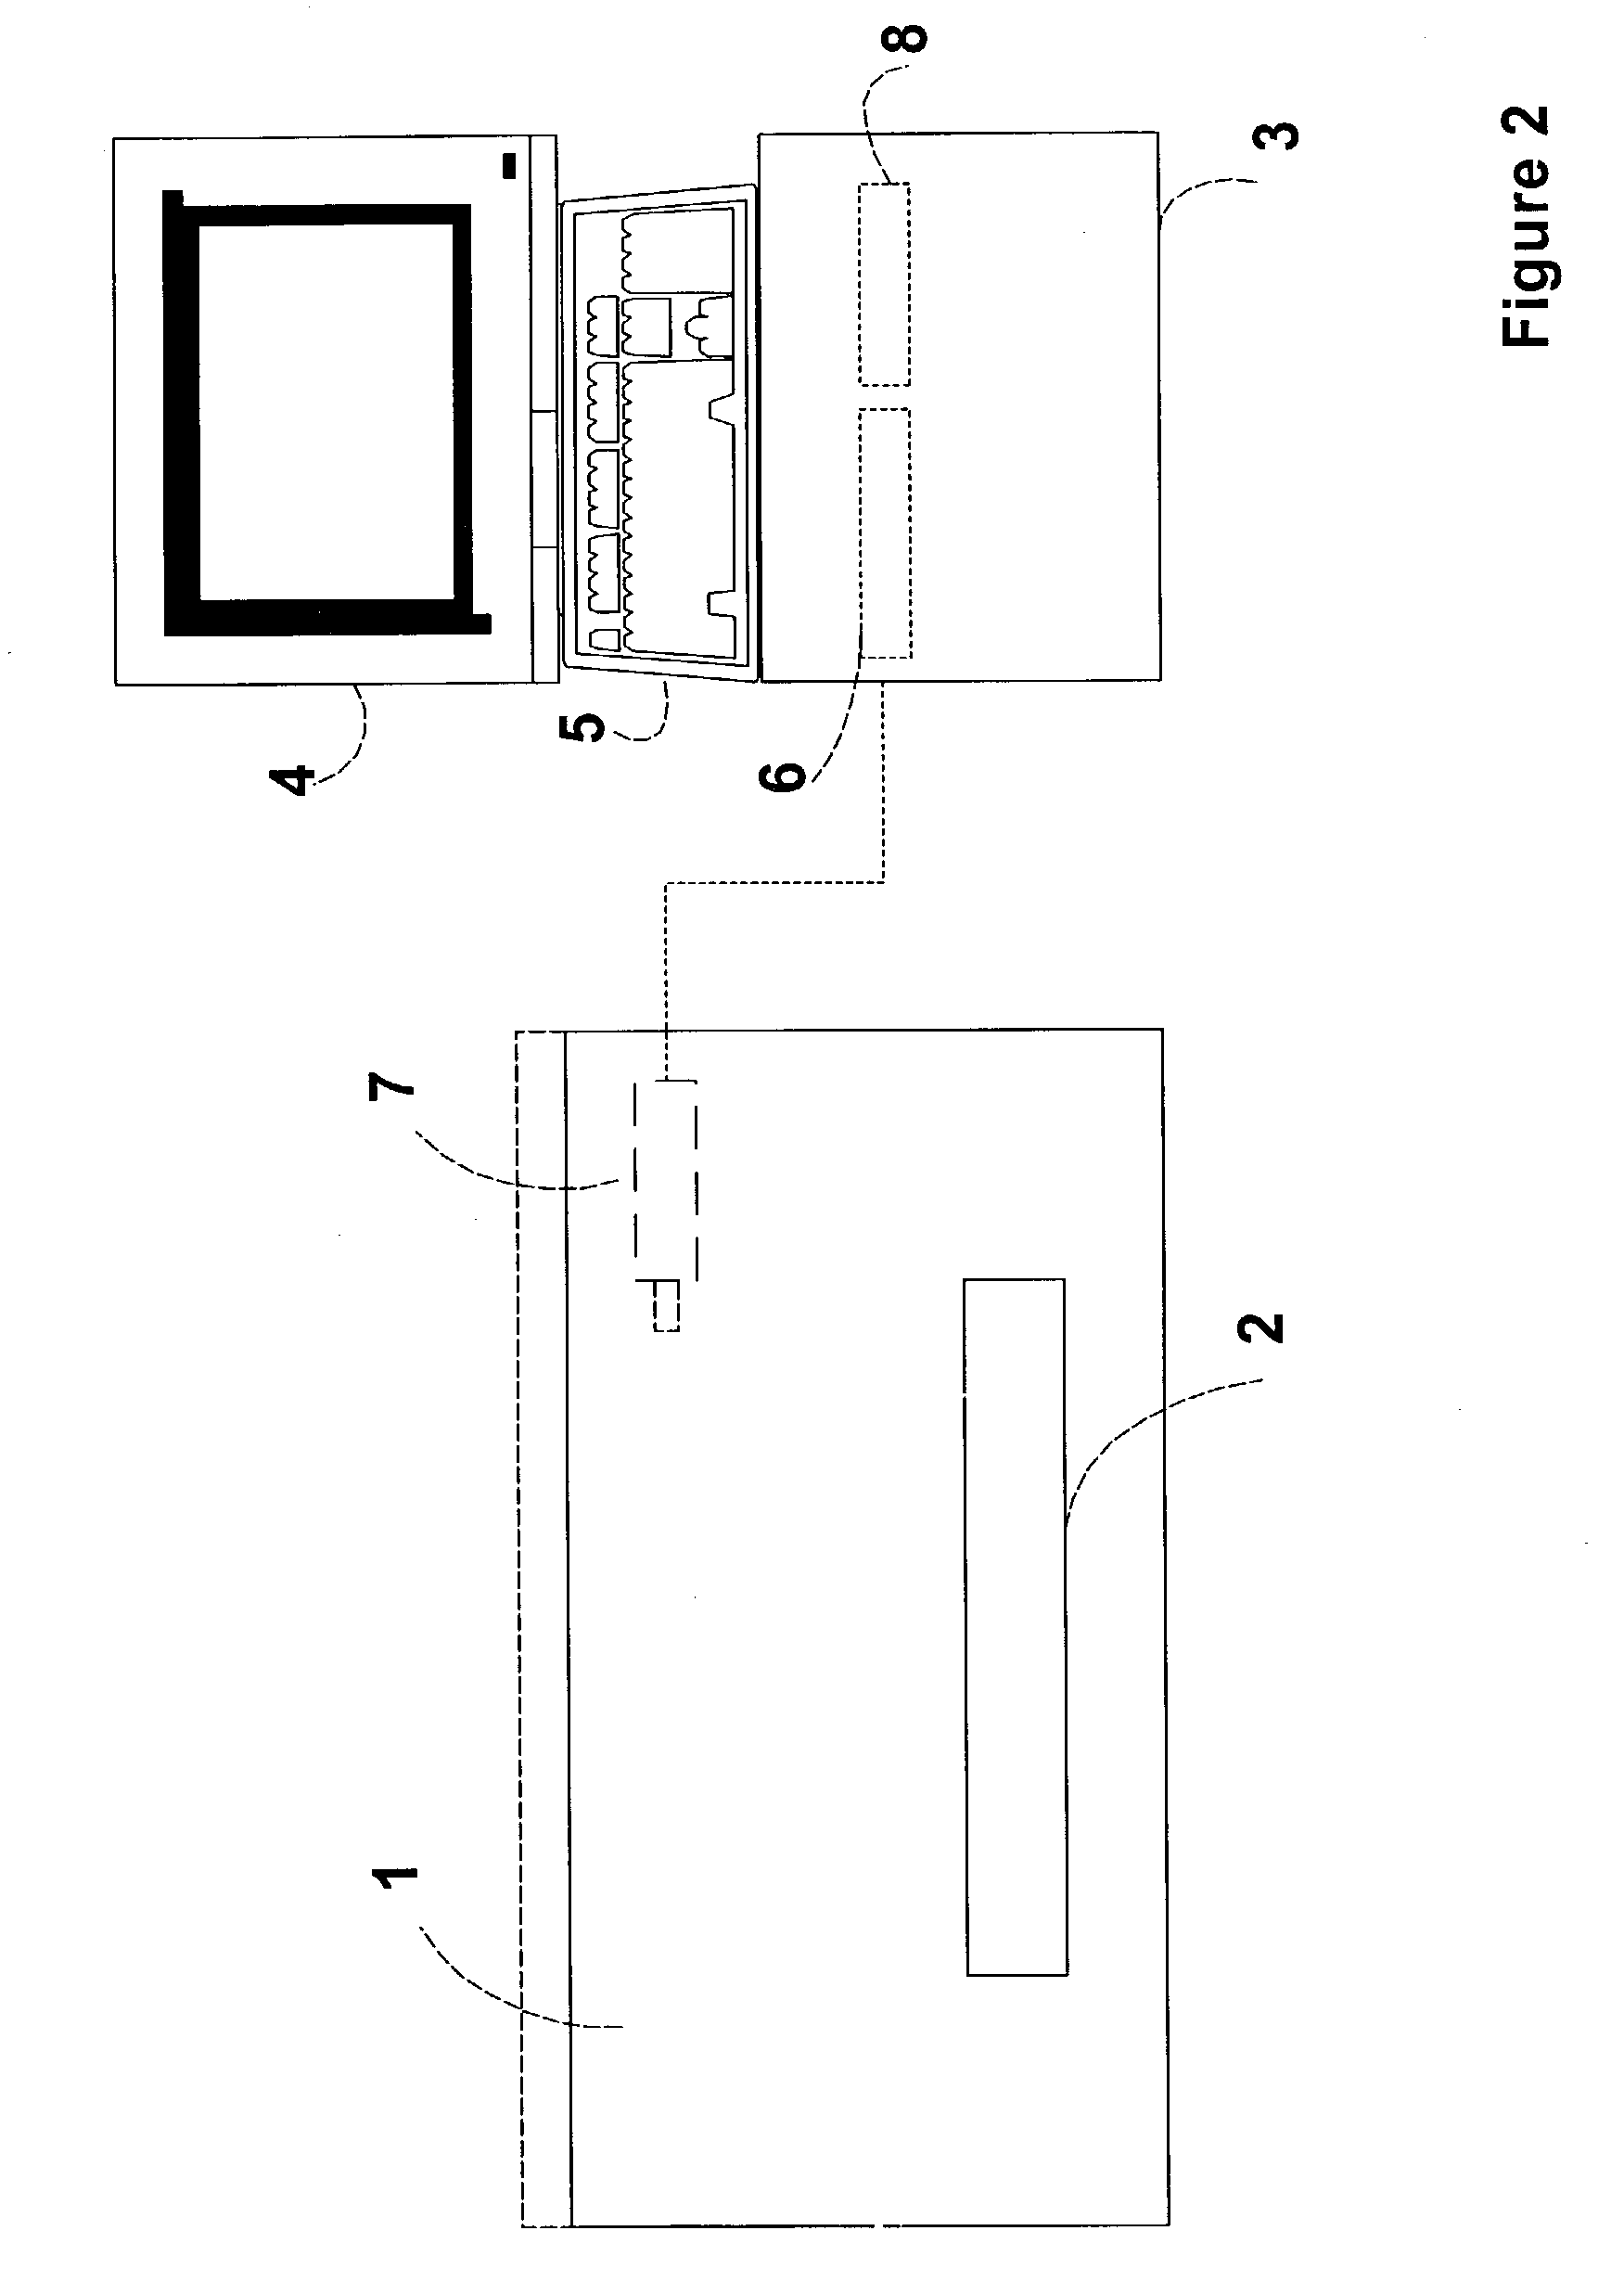 Method and system of storing and displaying meat